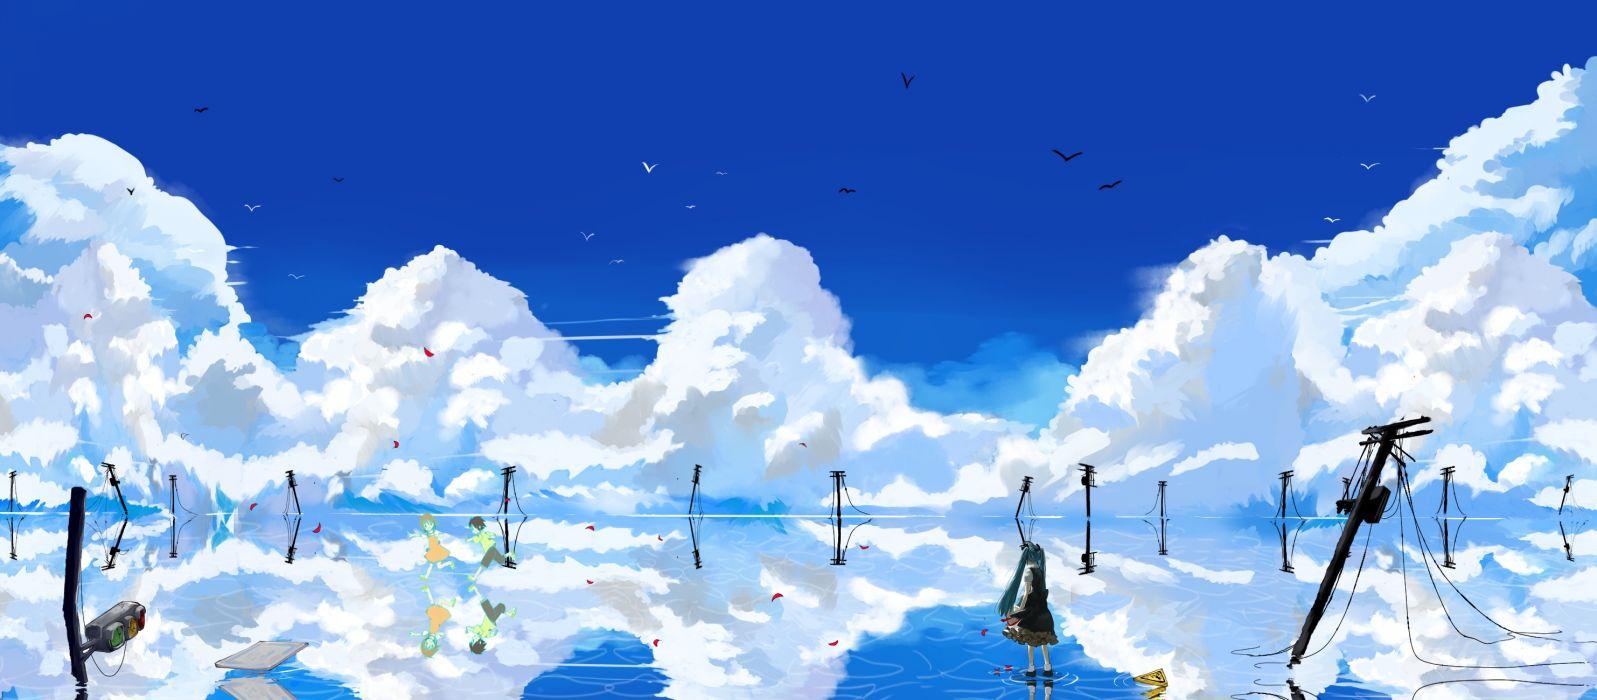 Water abstract blue clouds landscapes vocaloid hatsune miku